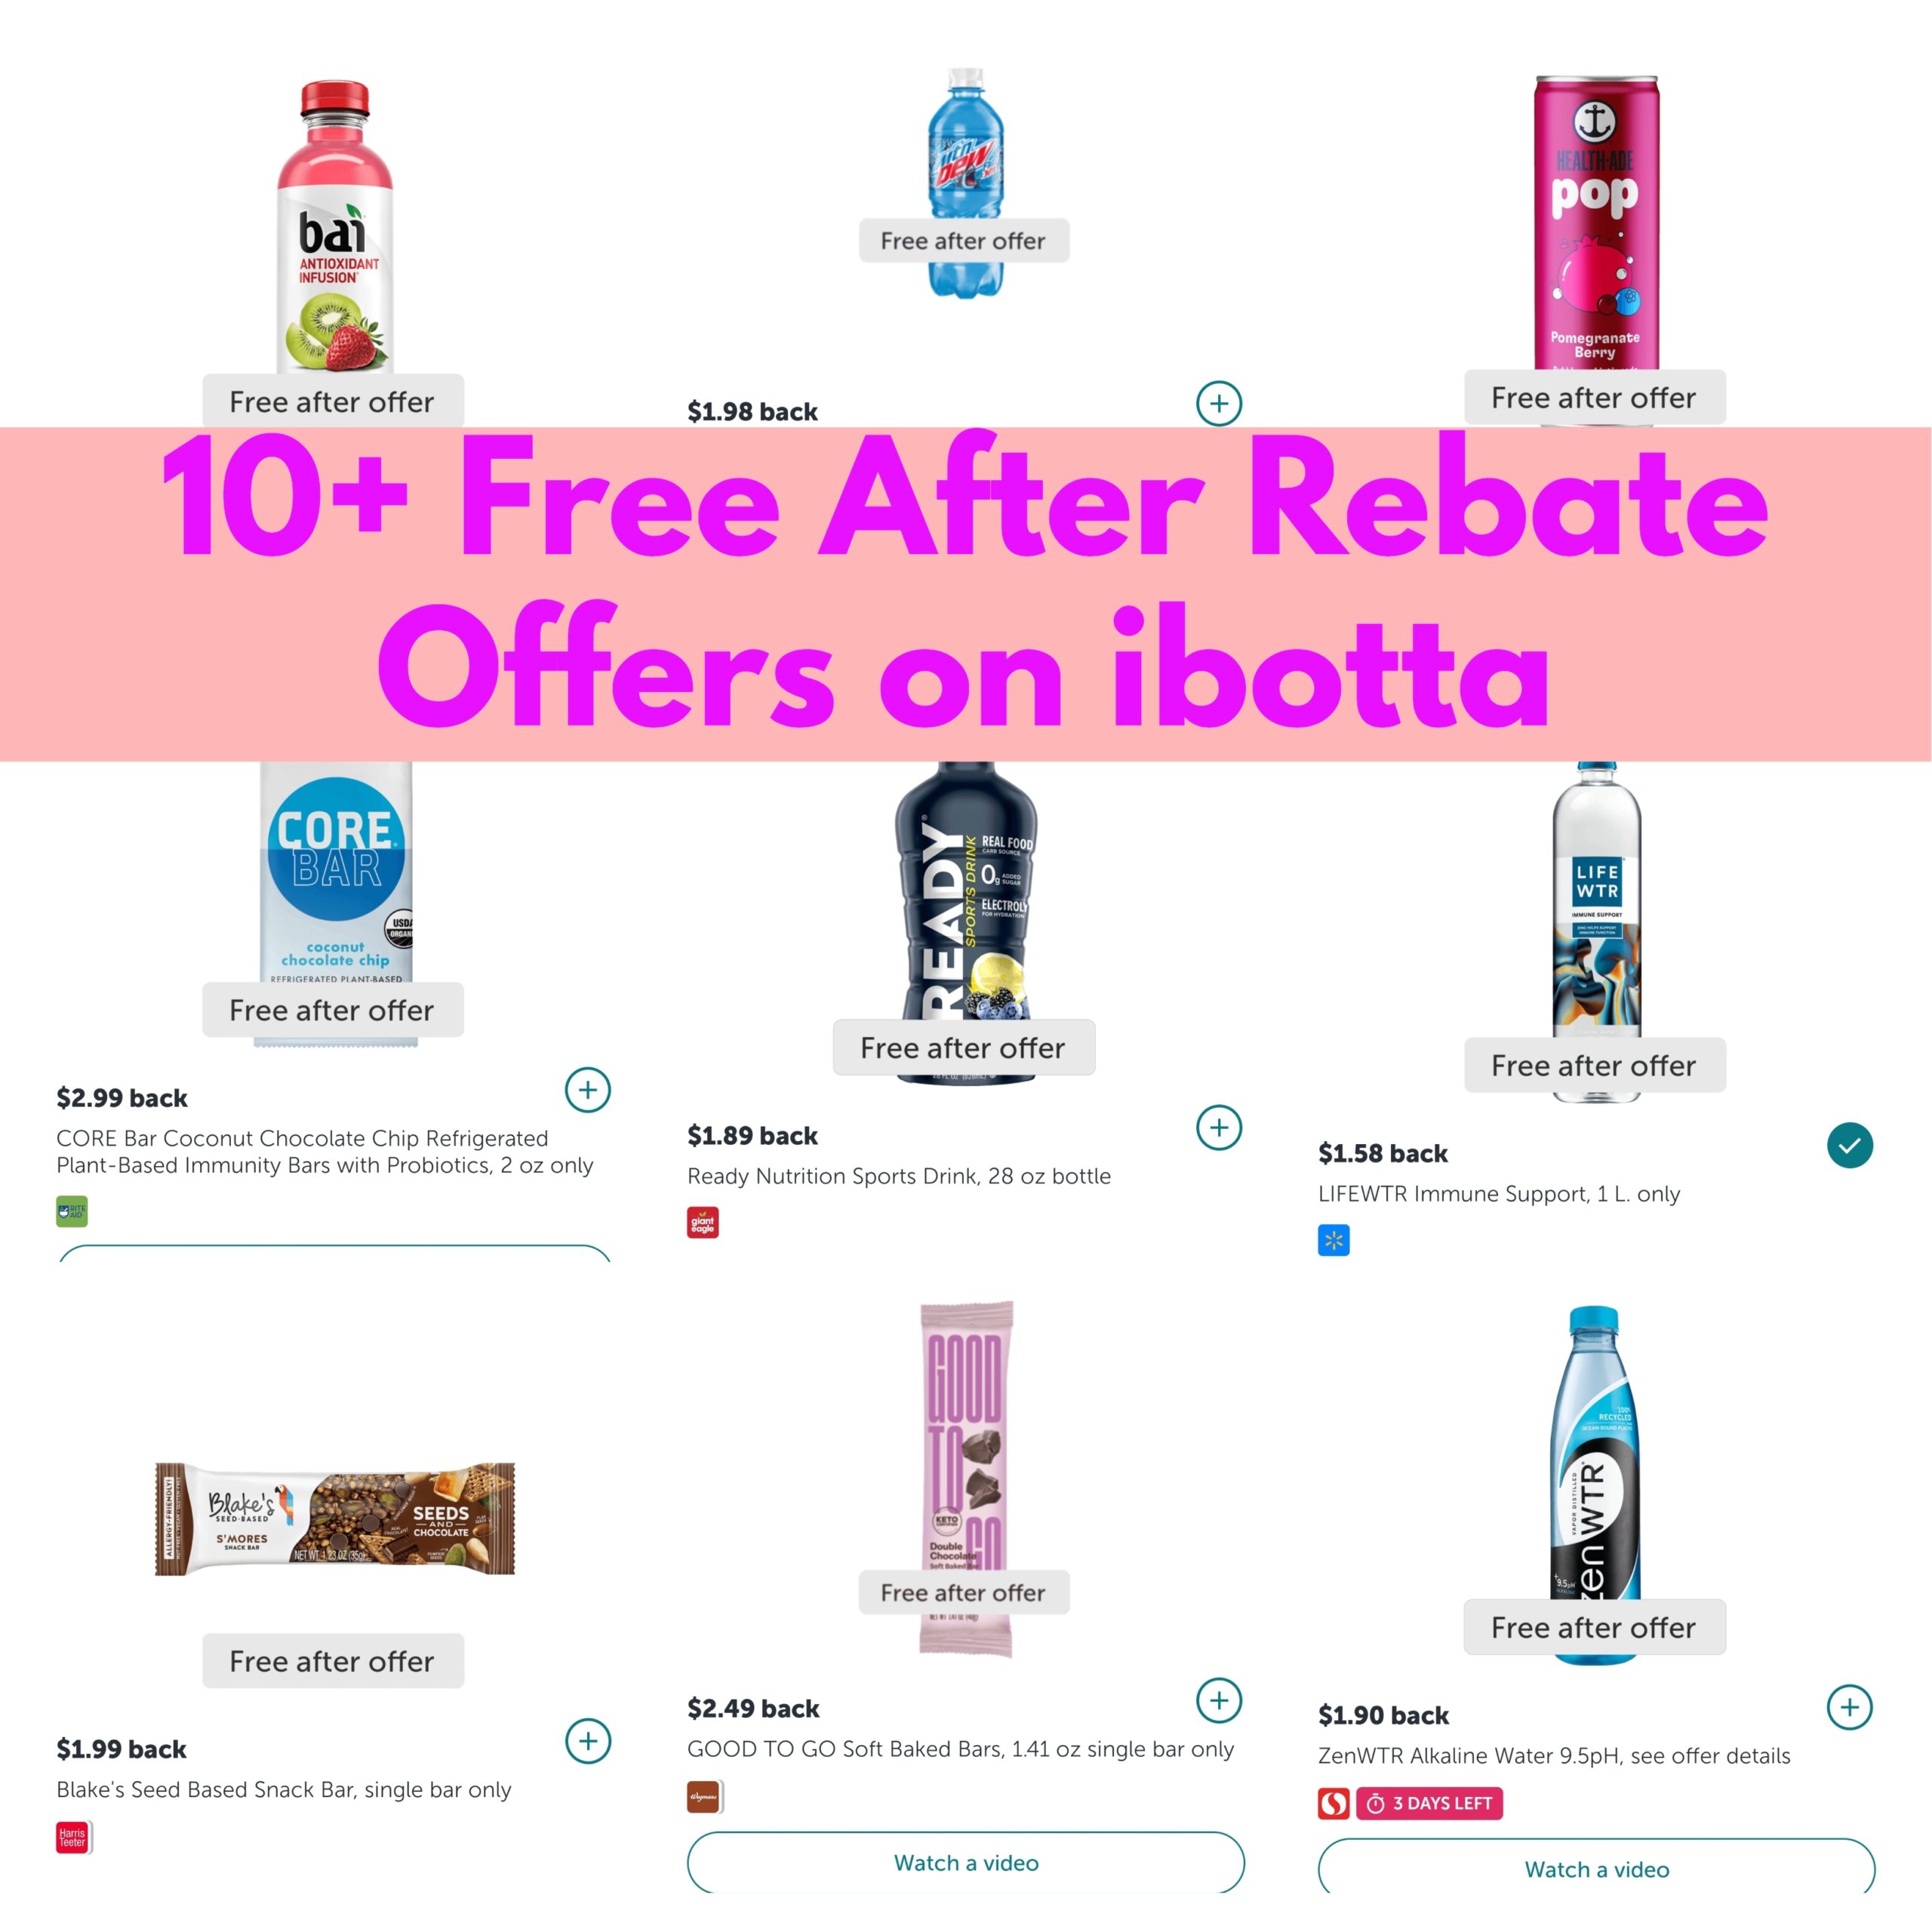 10+ Free After Rebate Offers on ibotta